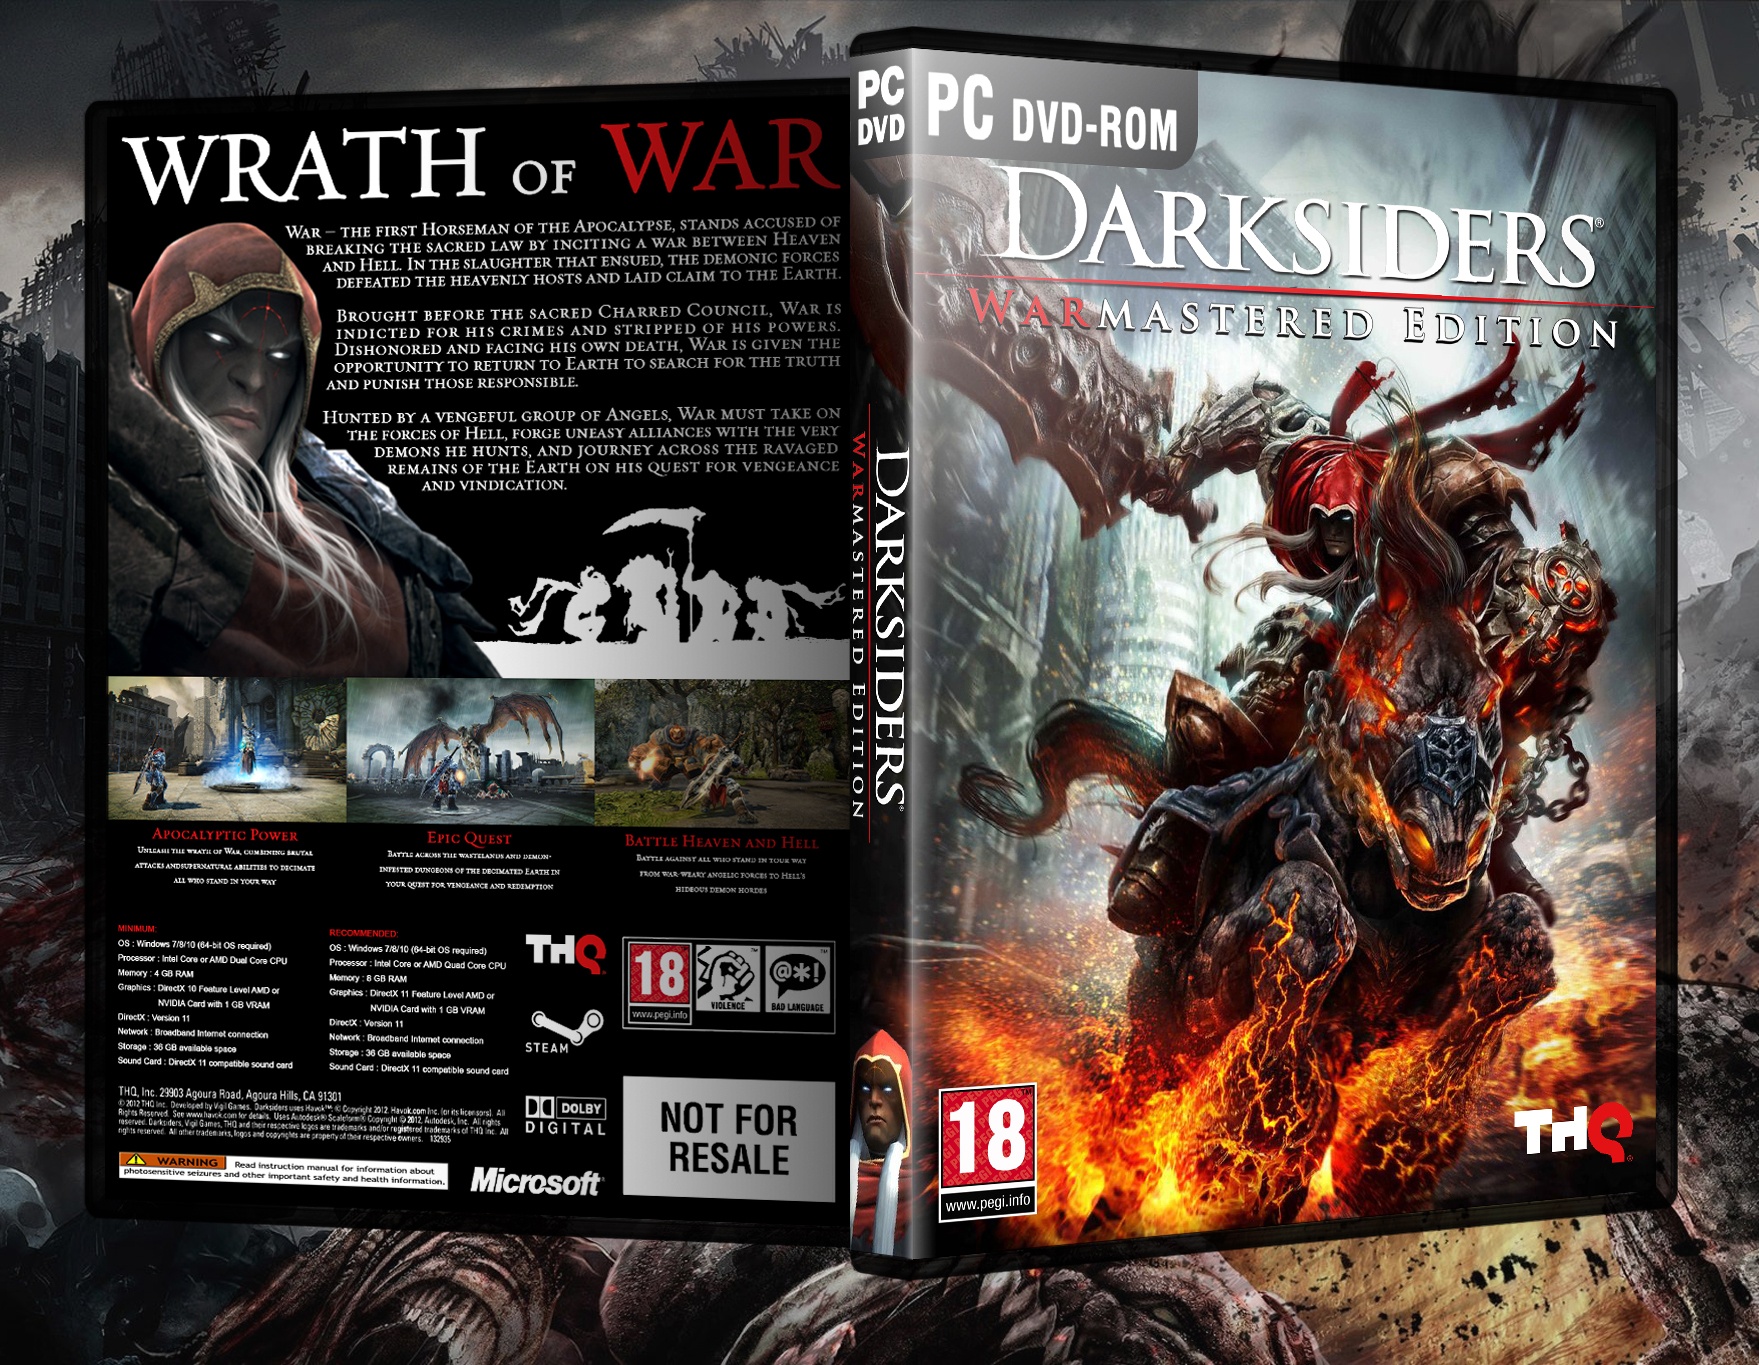 Darksiders Warmastered Edition box cover